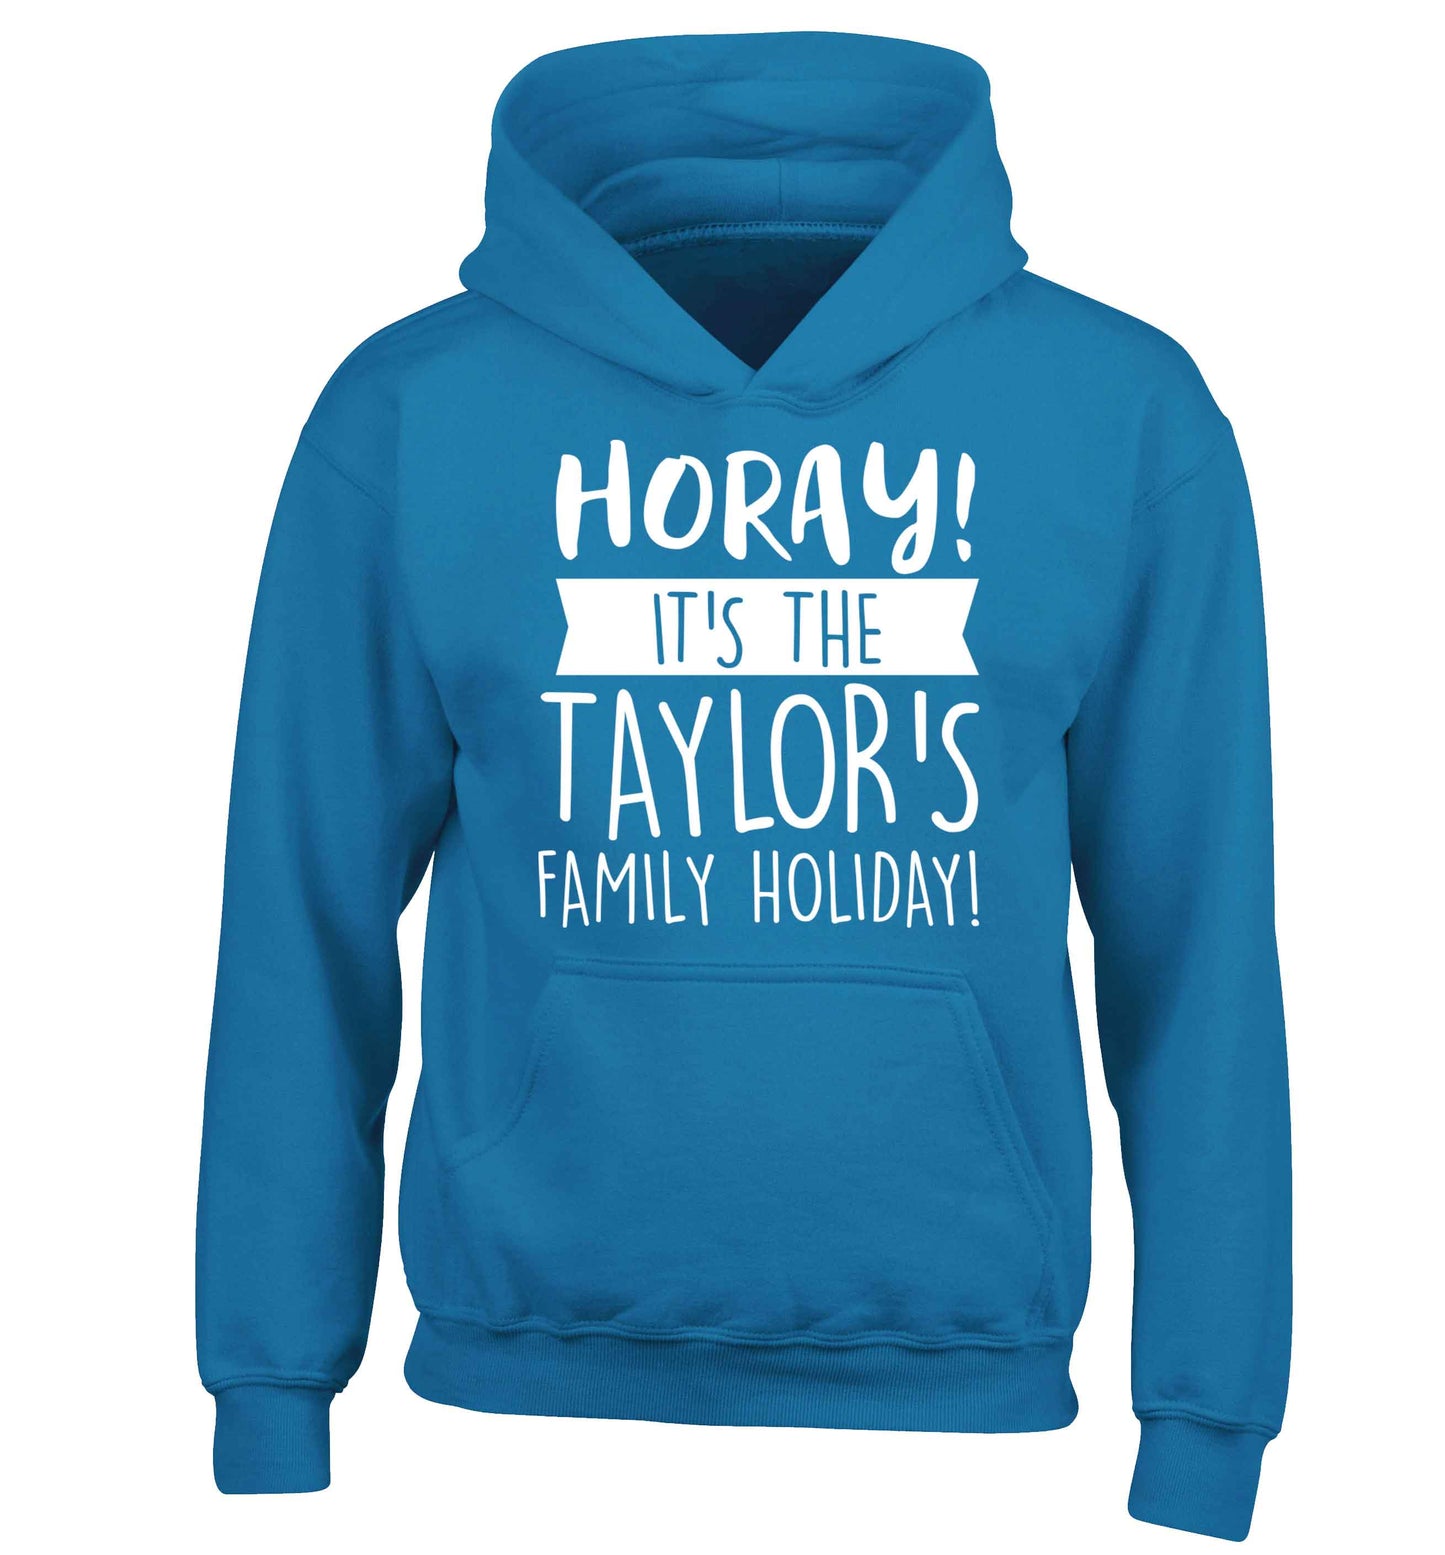 Horay it's the Taylor's family holiday! personalised item children's blue hoodie 12-13 Years